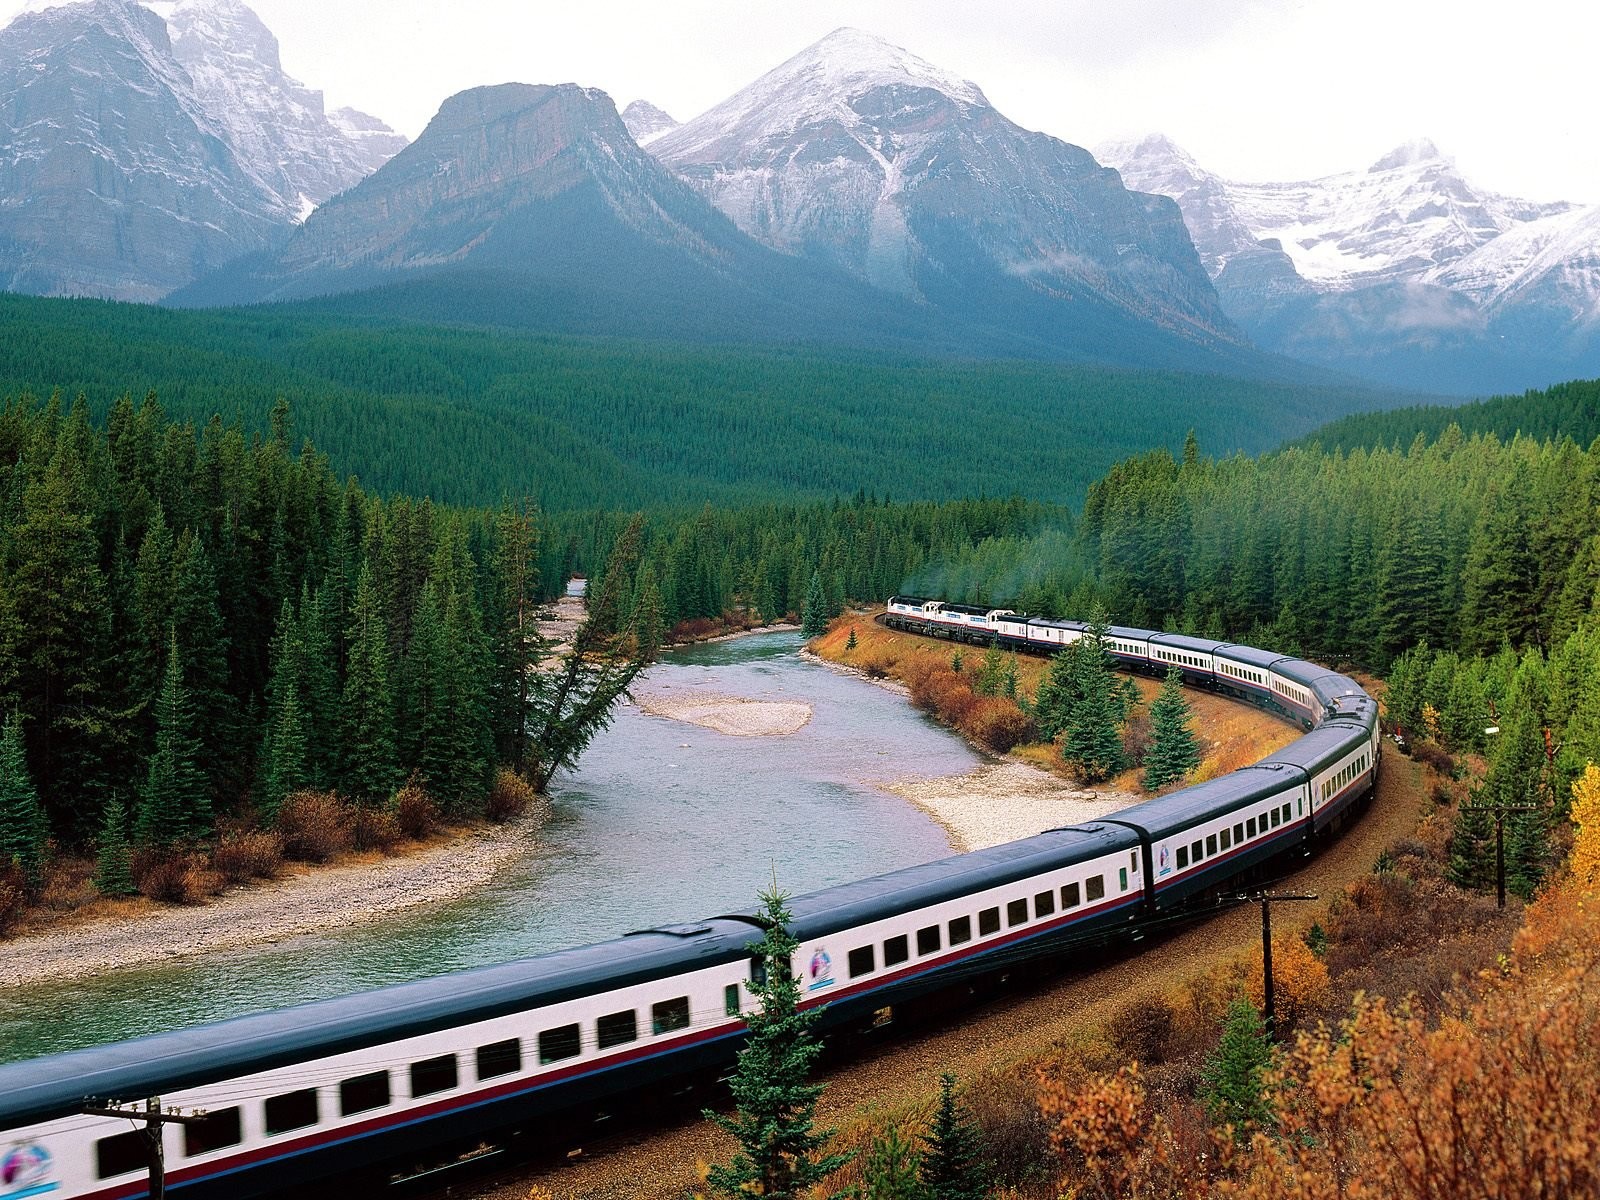 General 1600x1200 nature landscape train railway mountains snow trees forest river Canada vehicle